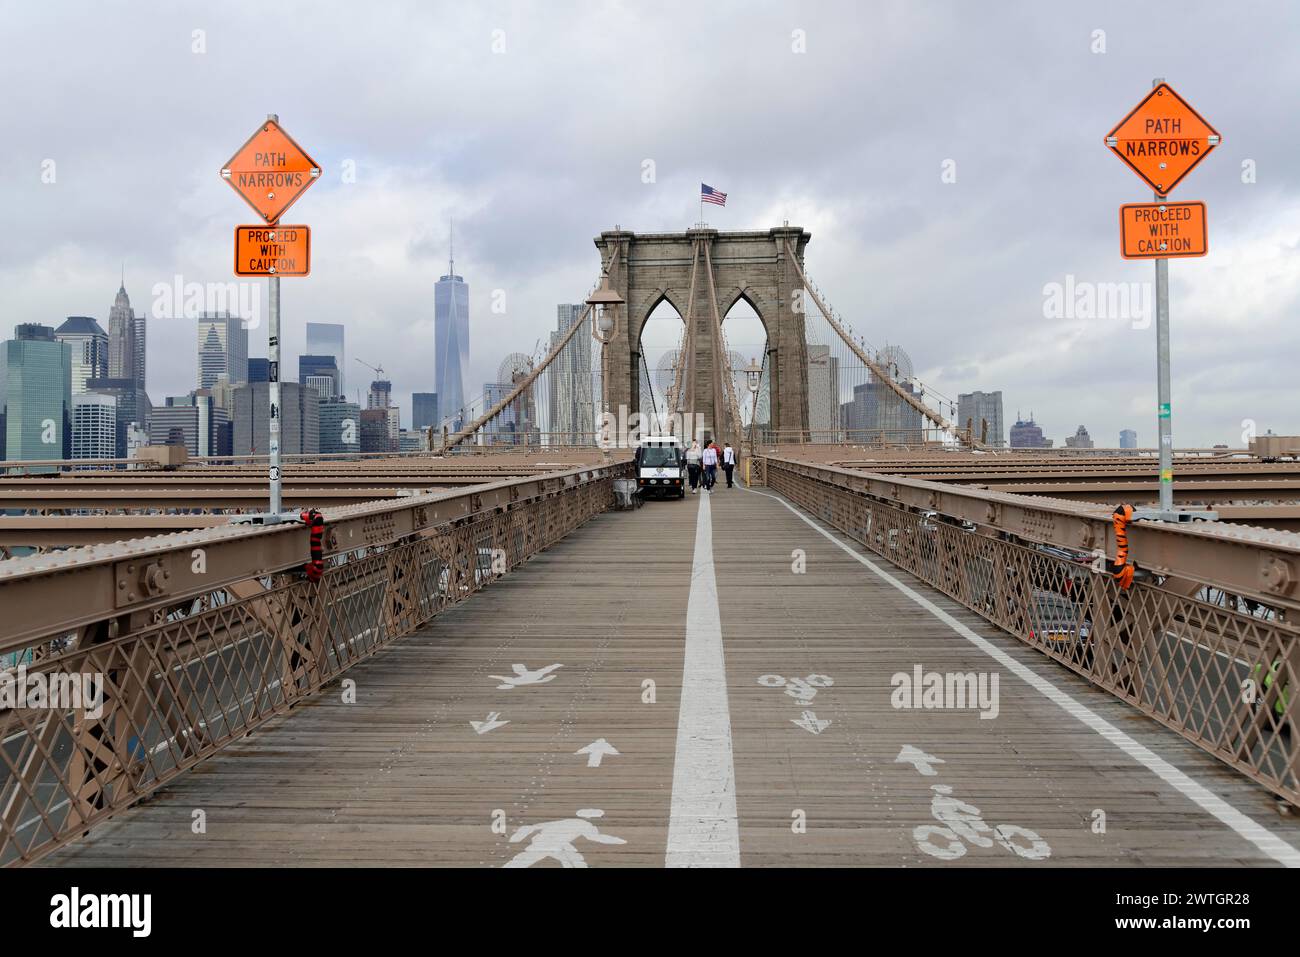 View of the Brooklyn Bridge pedestrian and cycle path with signs and skyline in the background, Manhattan, New York City, New York, USA, North America Stock Photo